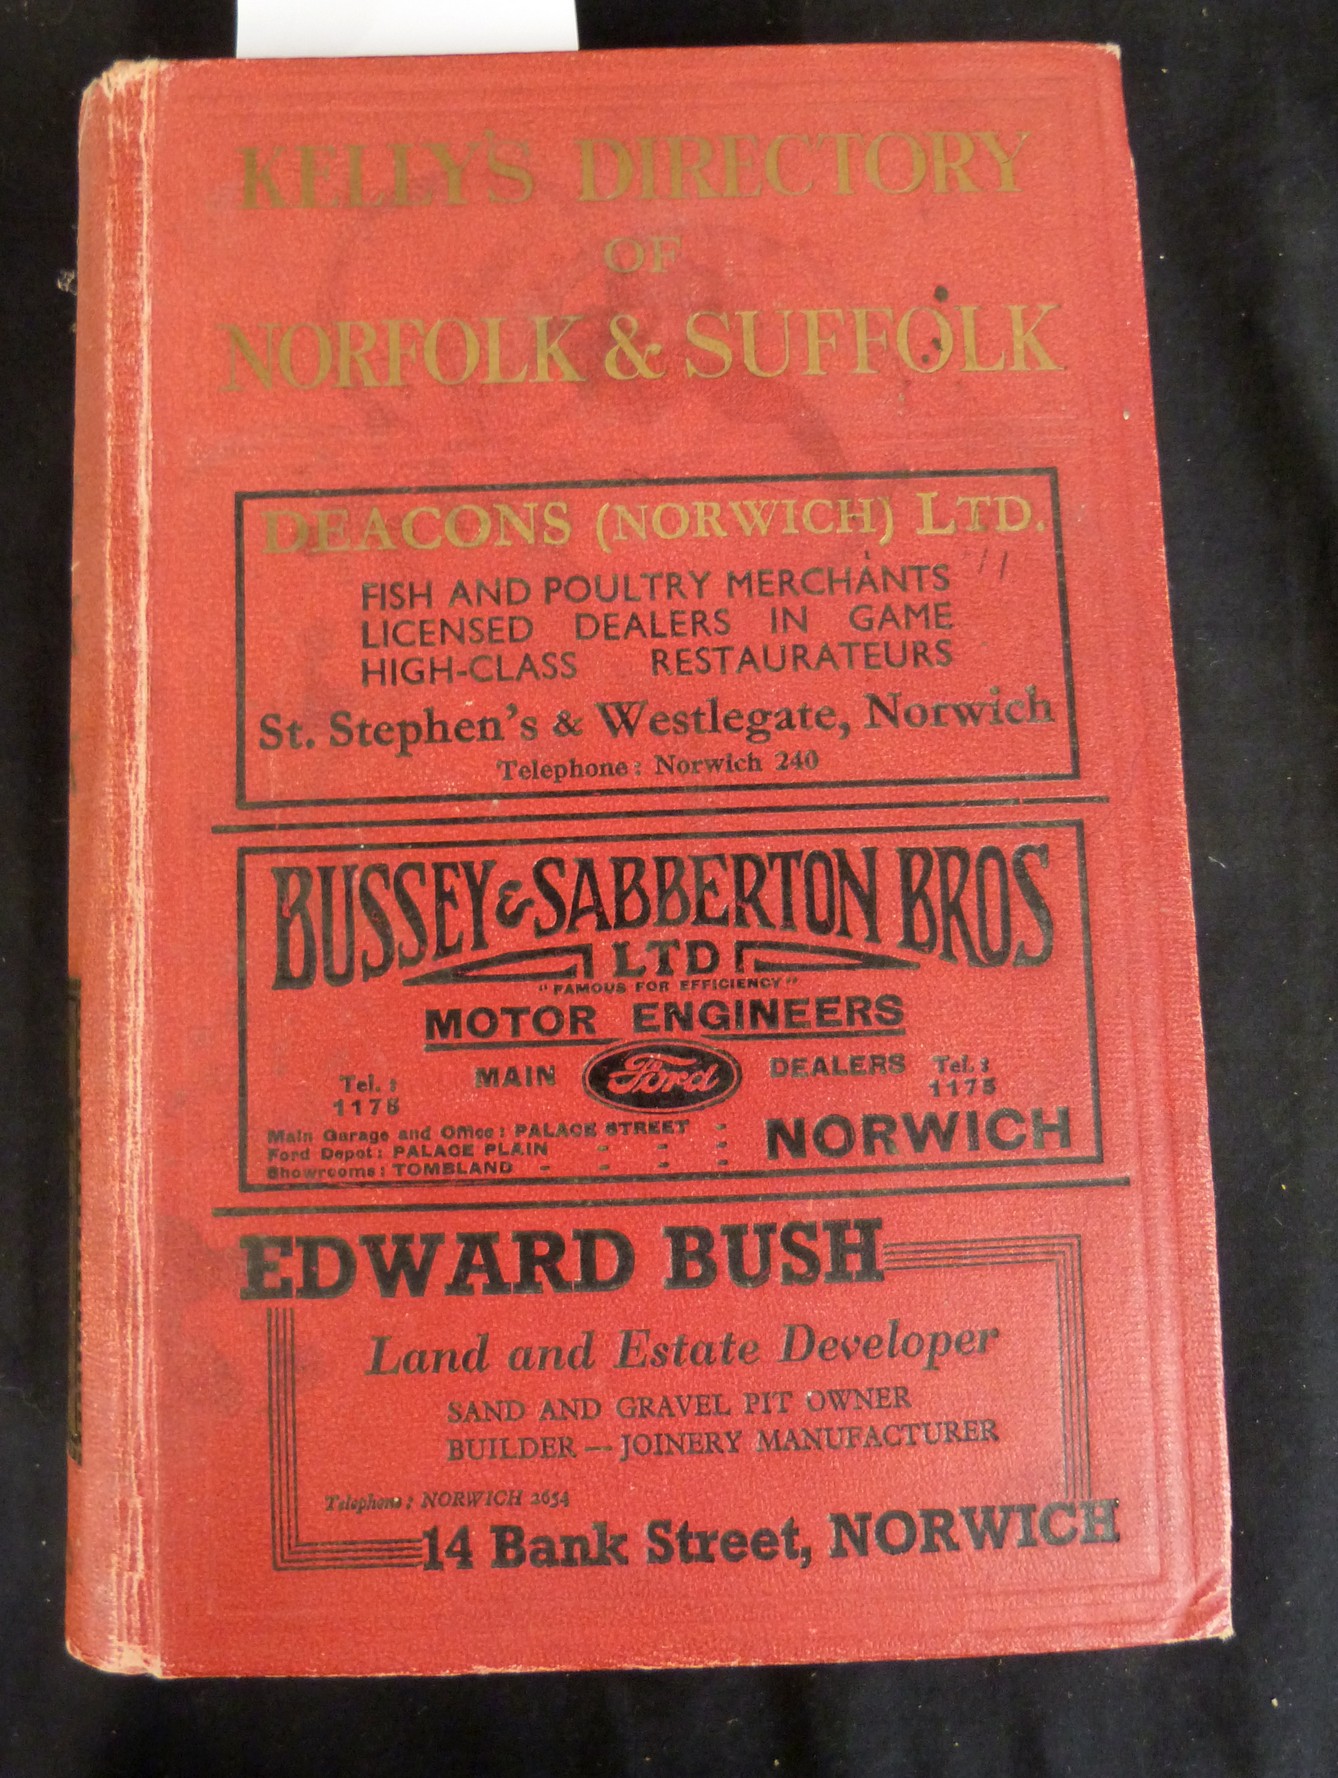 KELLY'S DIRECTORY OF NORFOLK AND SUFFOLK 1937, with map, original cloth gilt worn